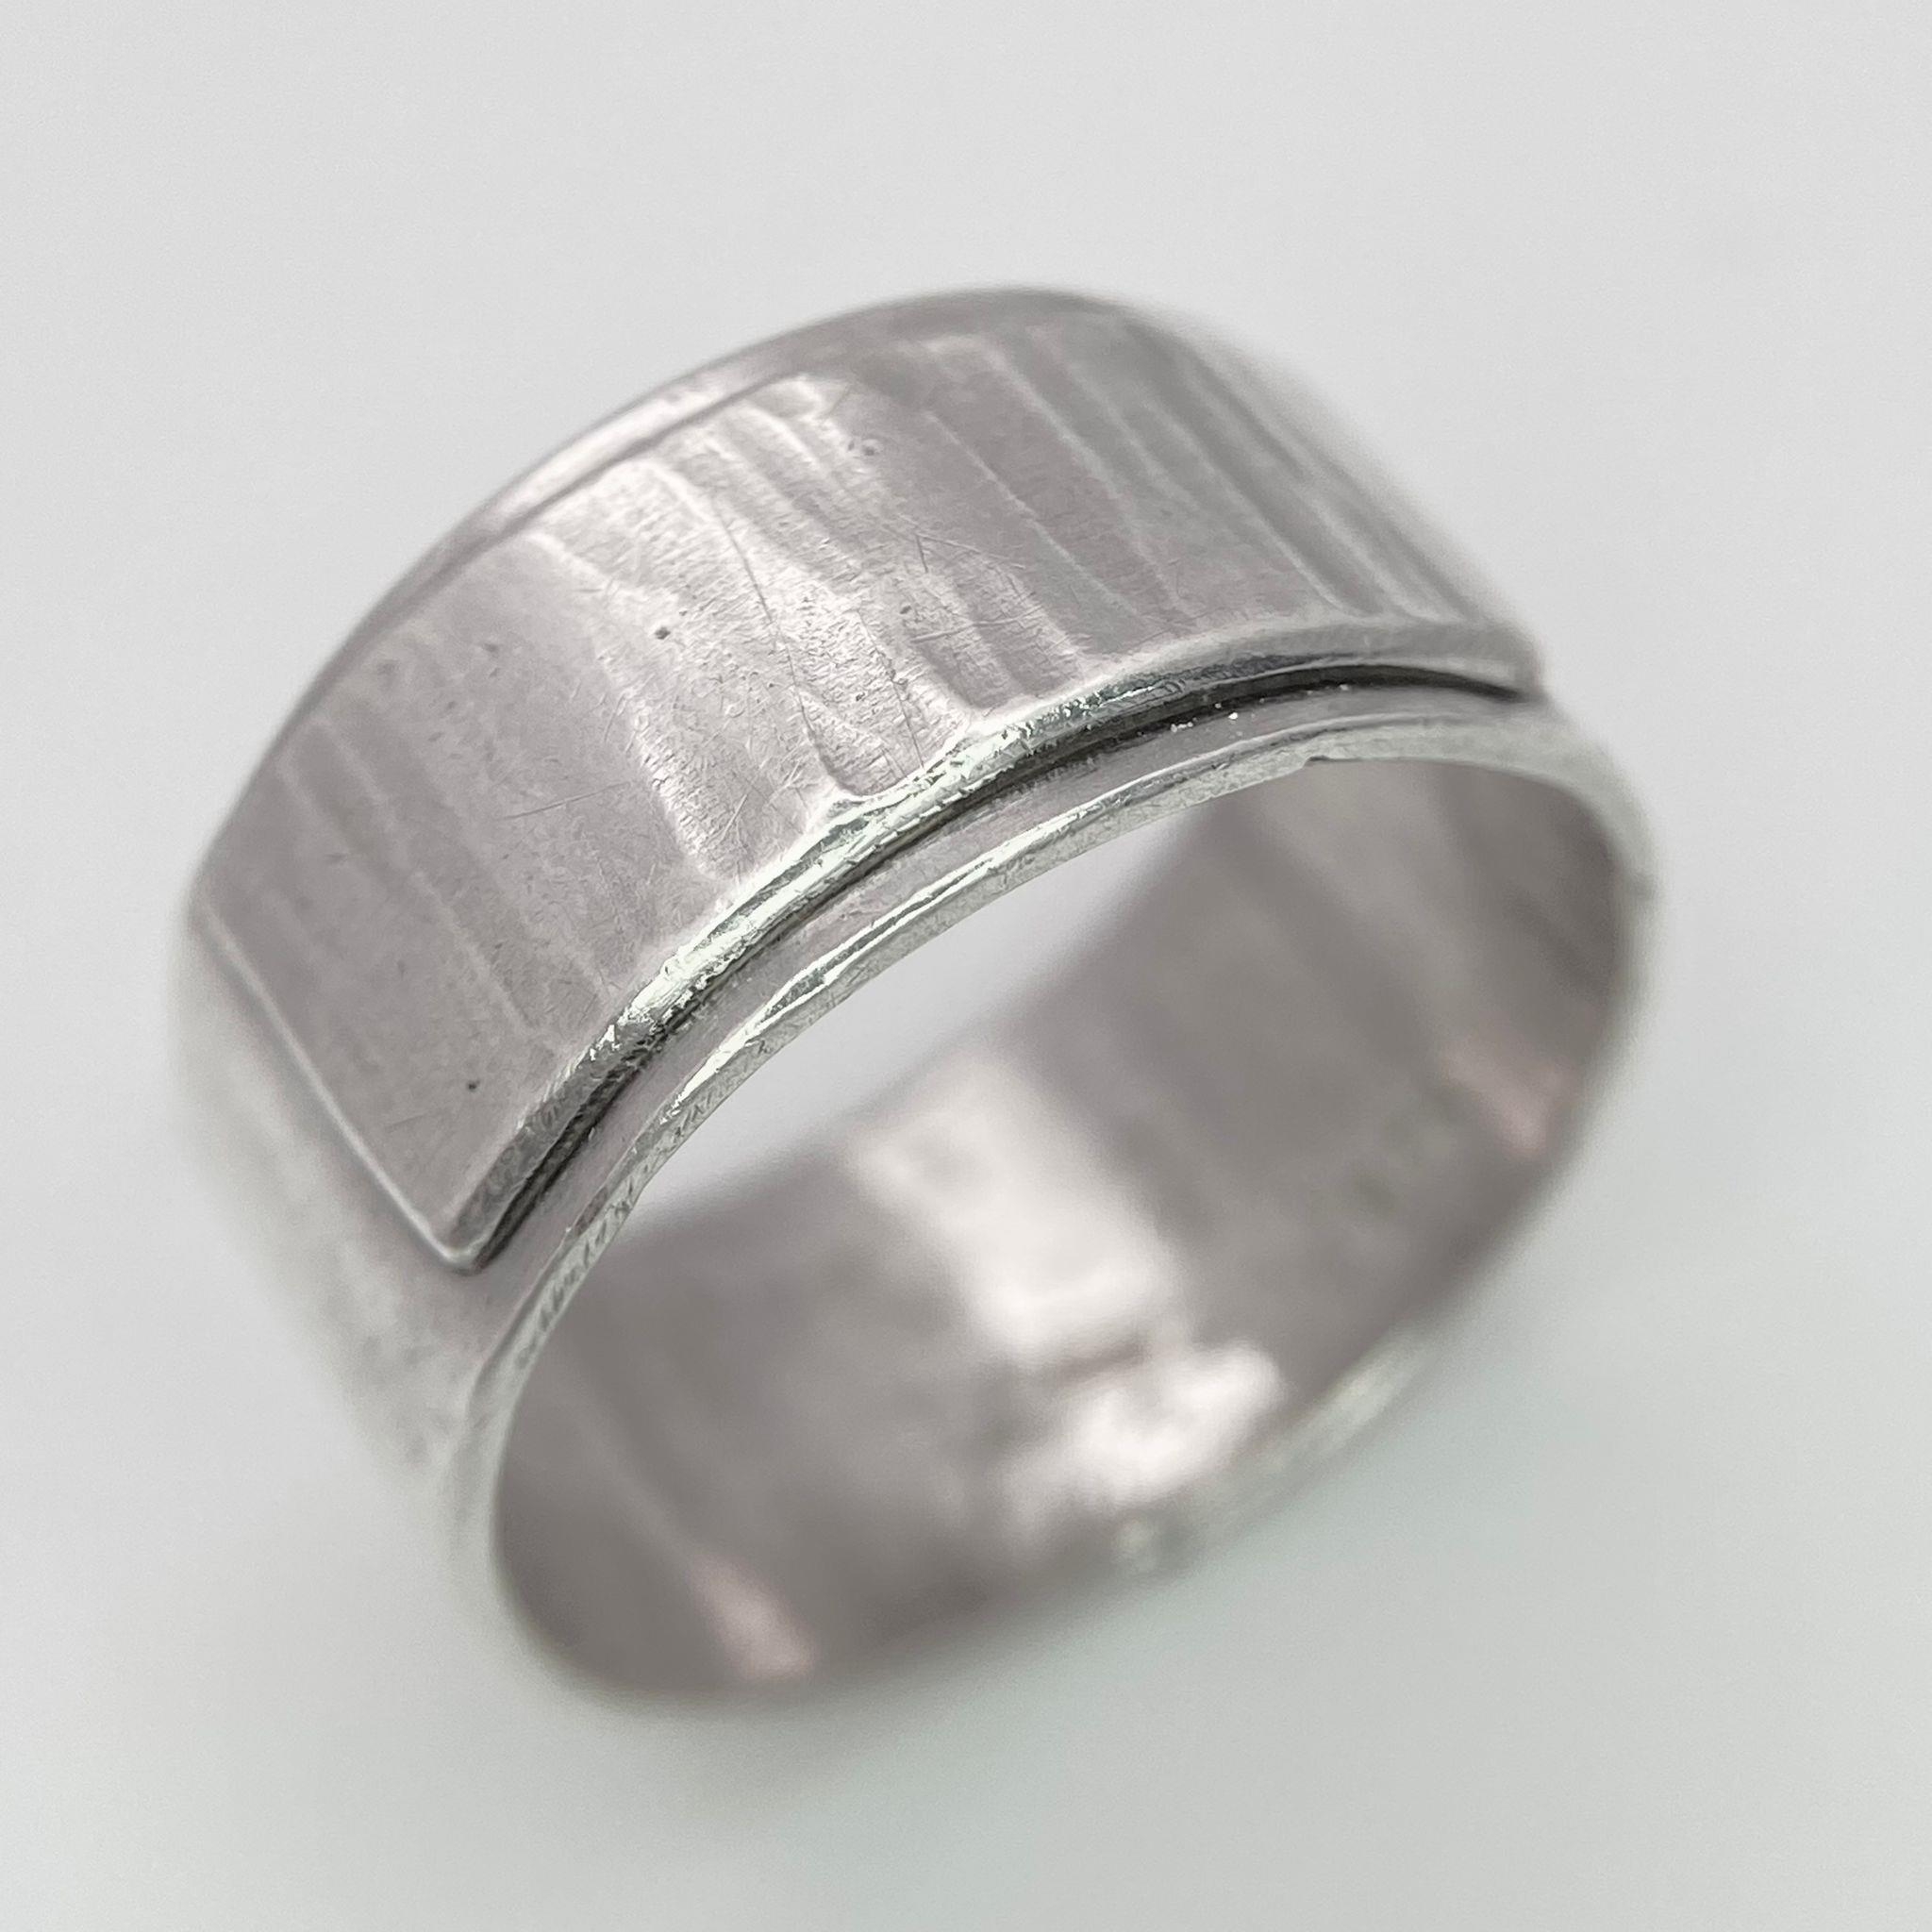 3X 925 silver band rings with different designs. Total weight 13.4G. Size U, V, R/S. - Image 4 of 13